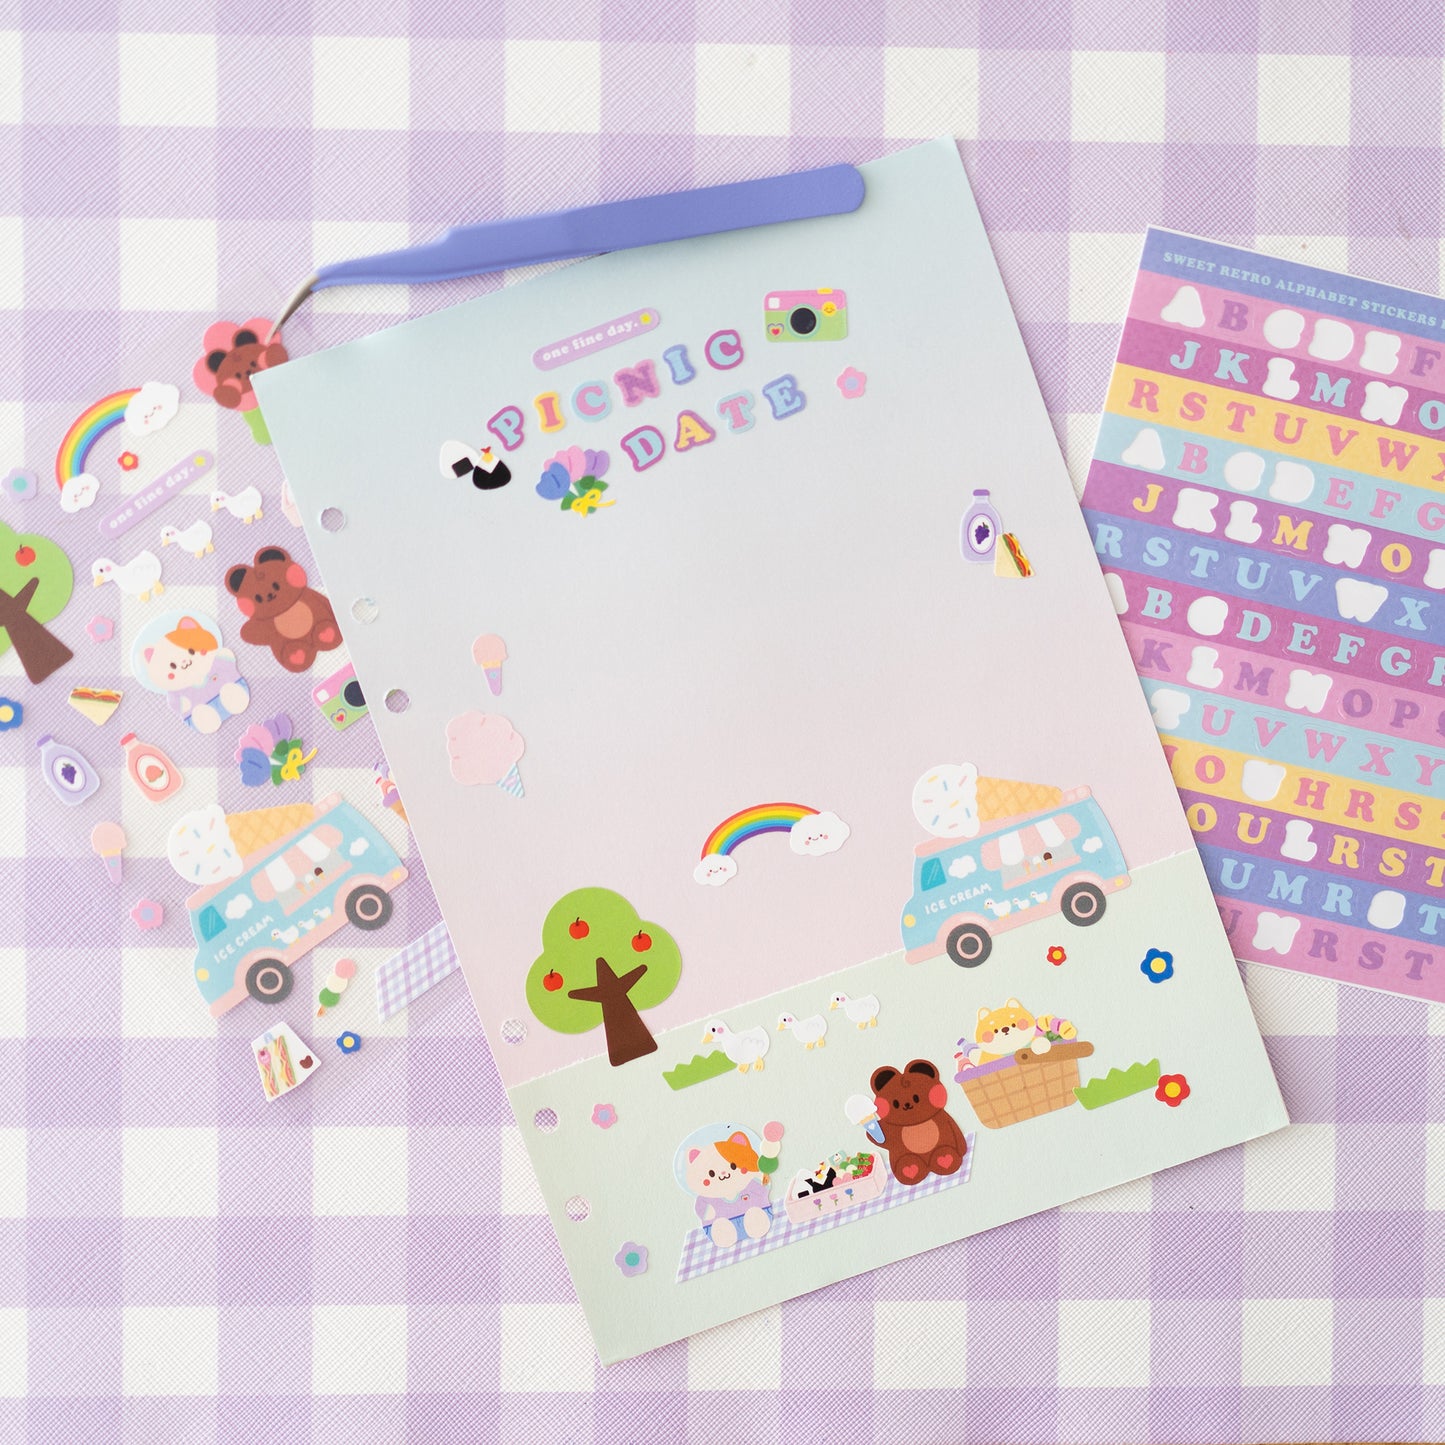 Picnic in the Park Journal Sticker Sheet